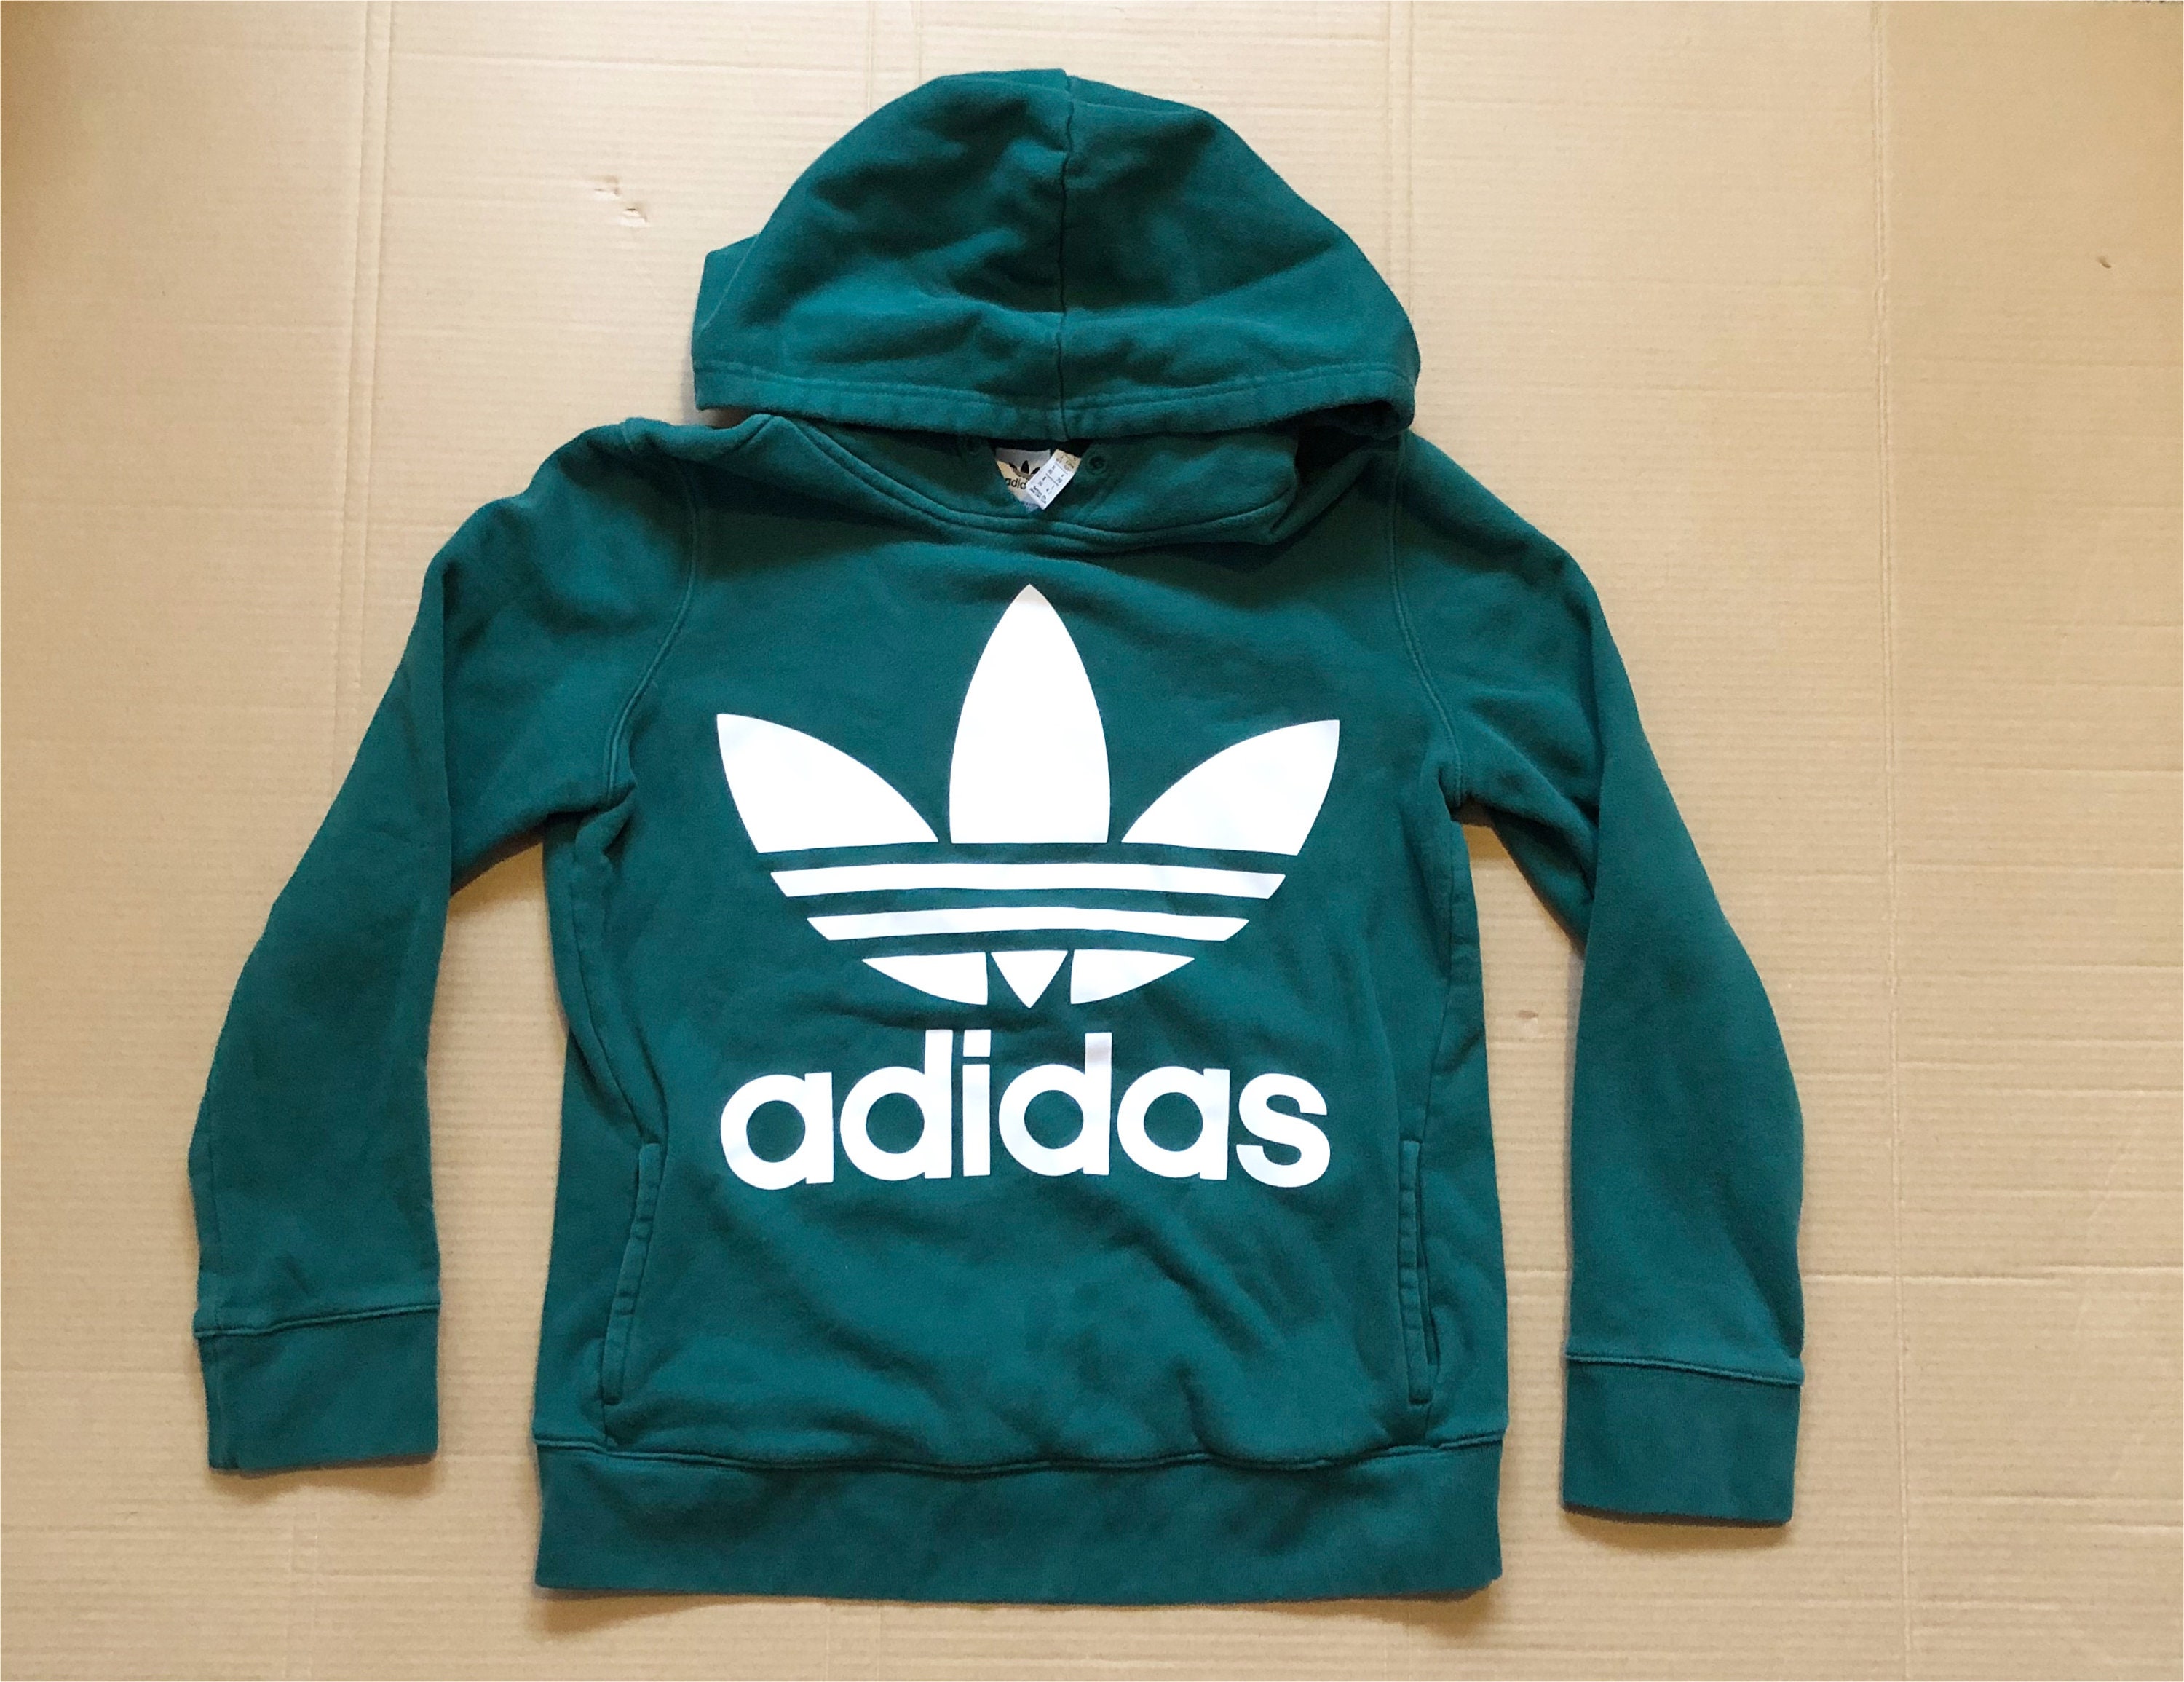 Vintage Adidas Hoodie Green Pockets Sweater size Small | Etsy